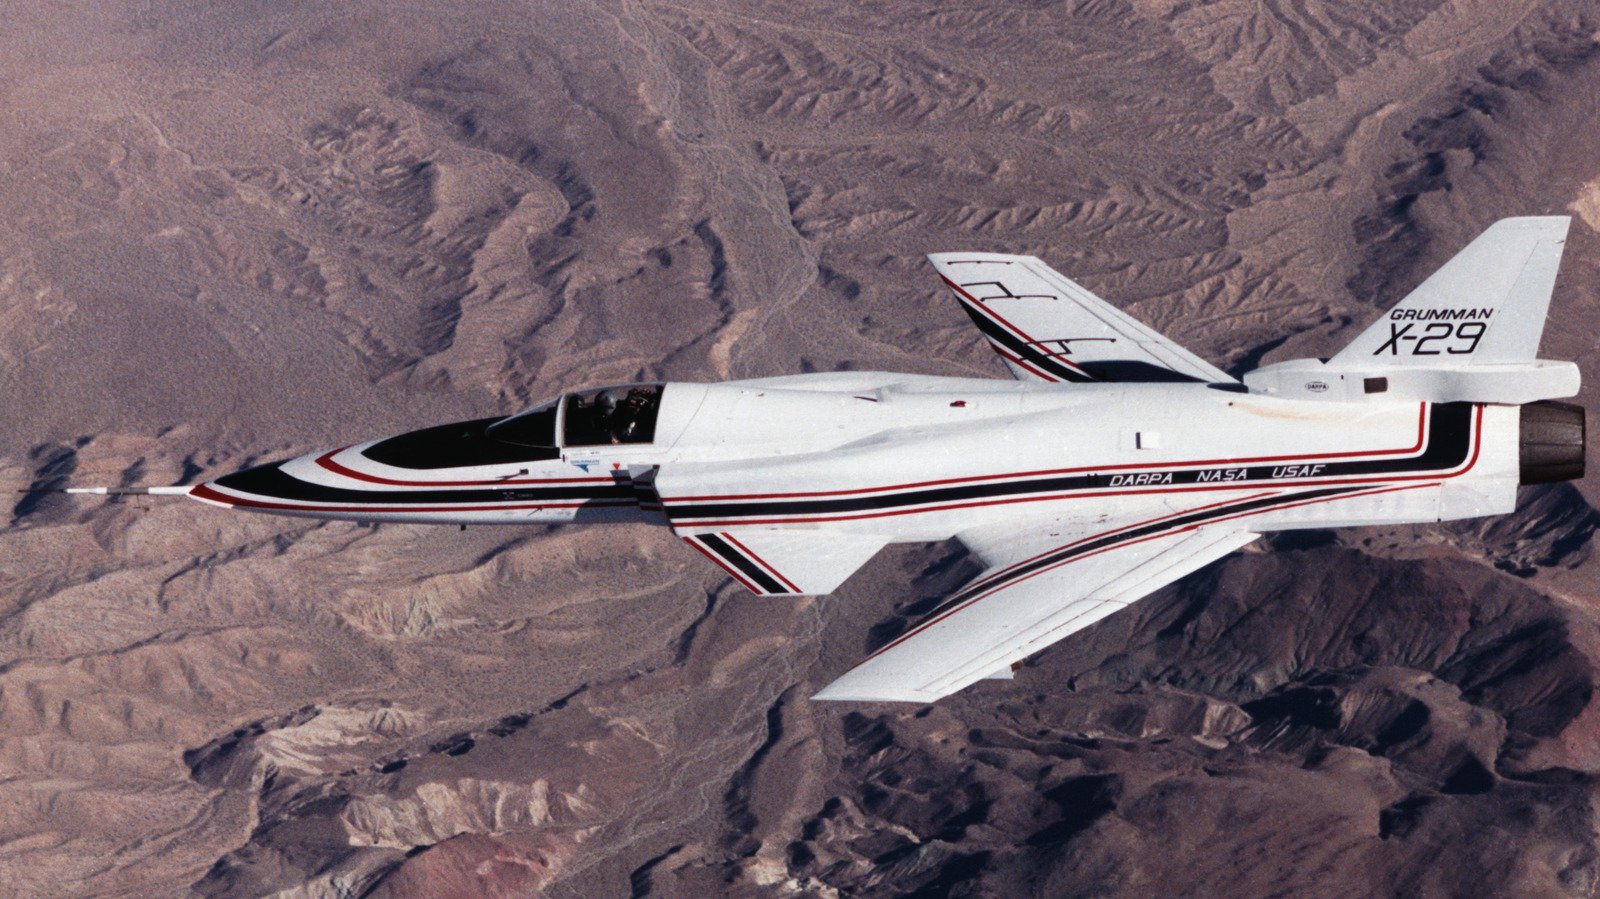 Why The Grumman X-29 Is One Of The Strangest Jets Ever Designed